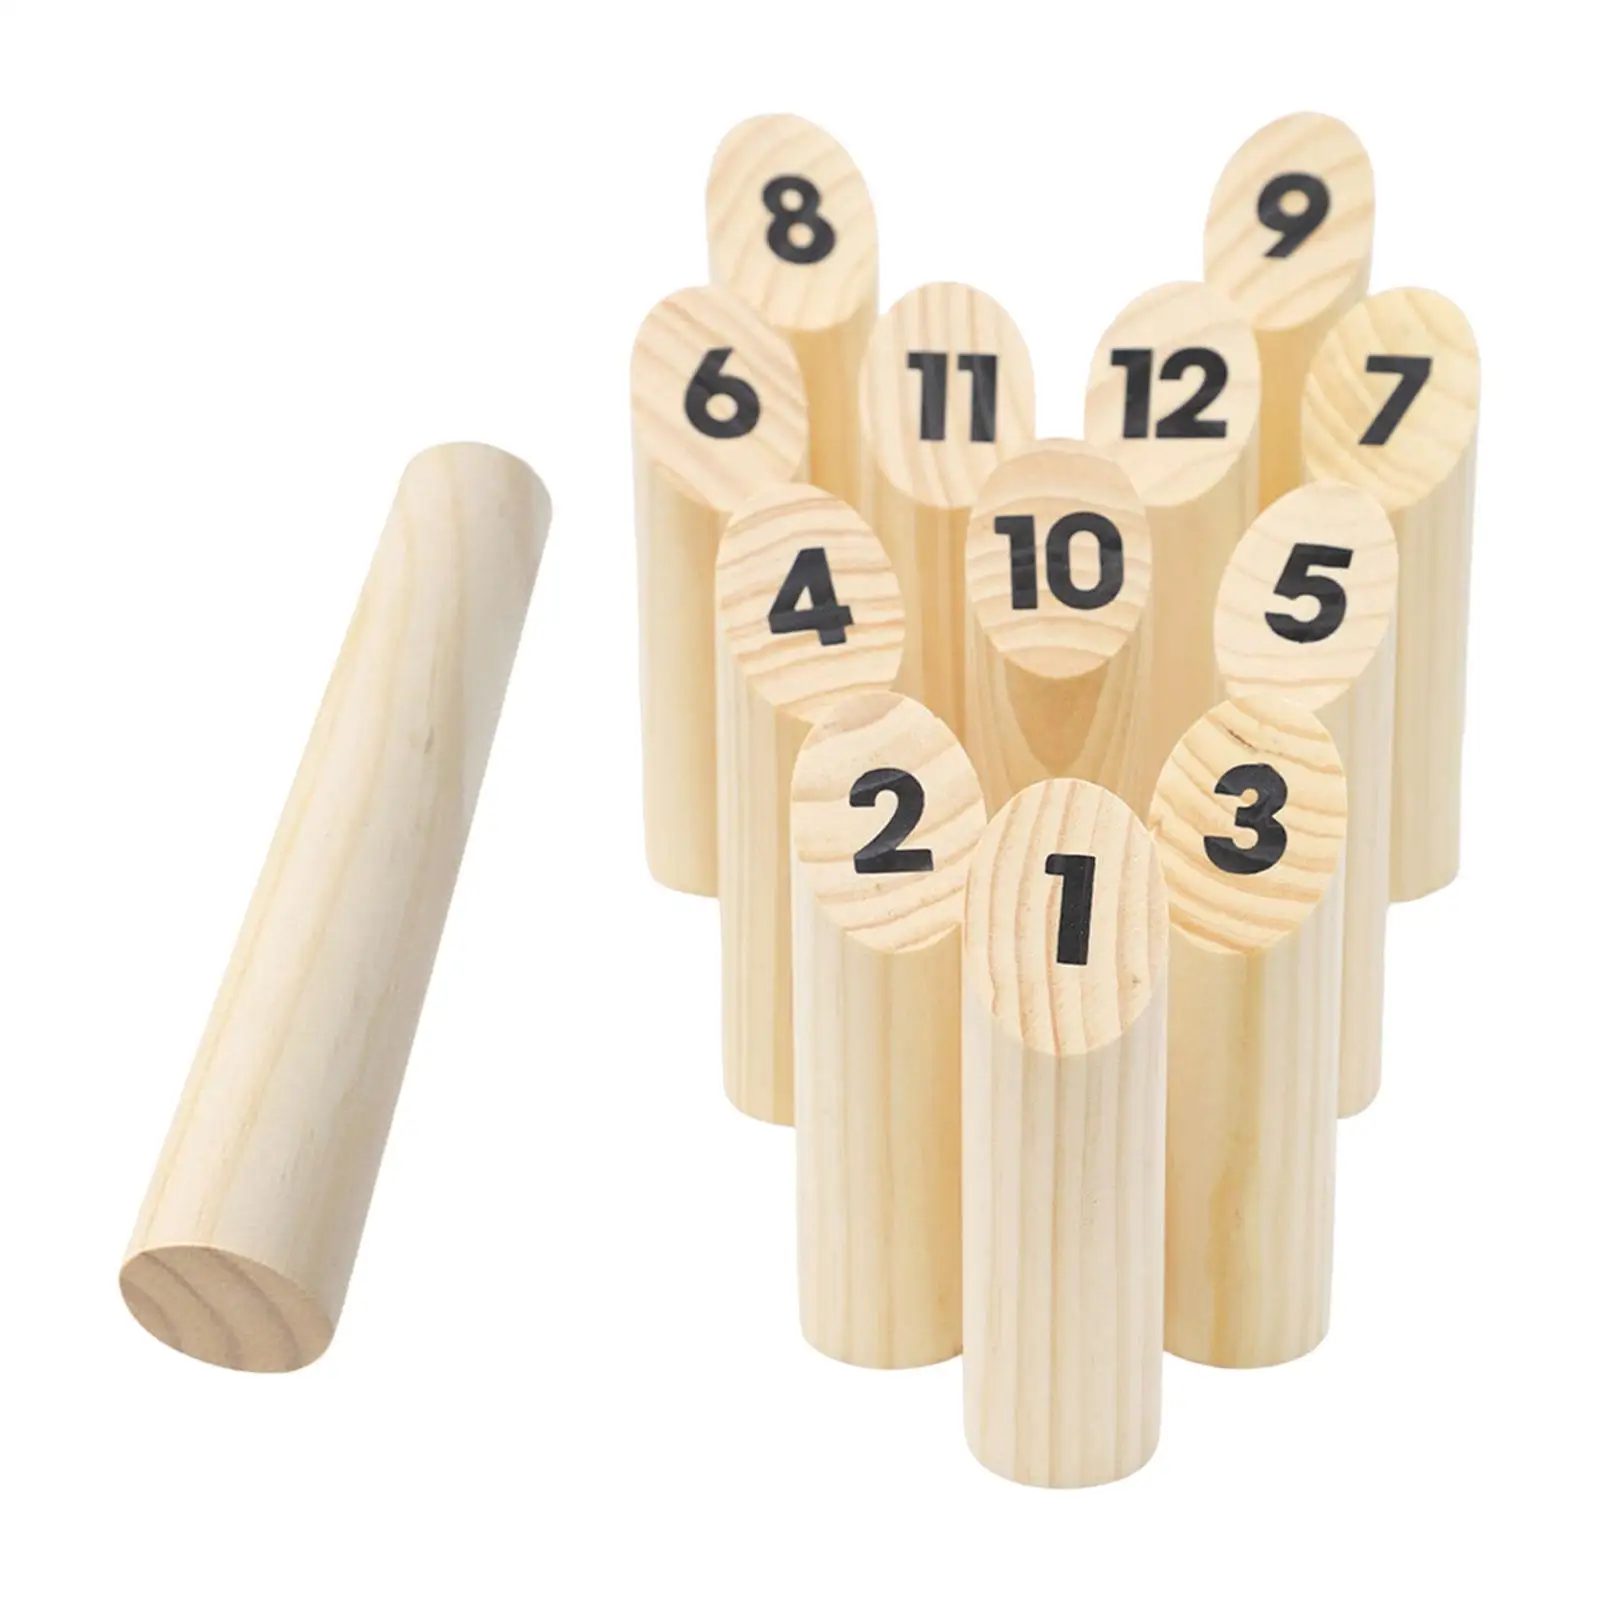 Wood Toss Game Throw Bowling Teen Adult Kids Throwing Dowel Family Game numbered block Toy Set for Beach Outdoor Lawn Playground